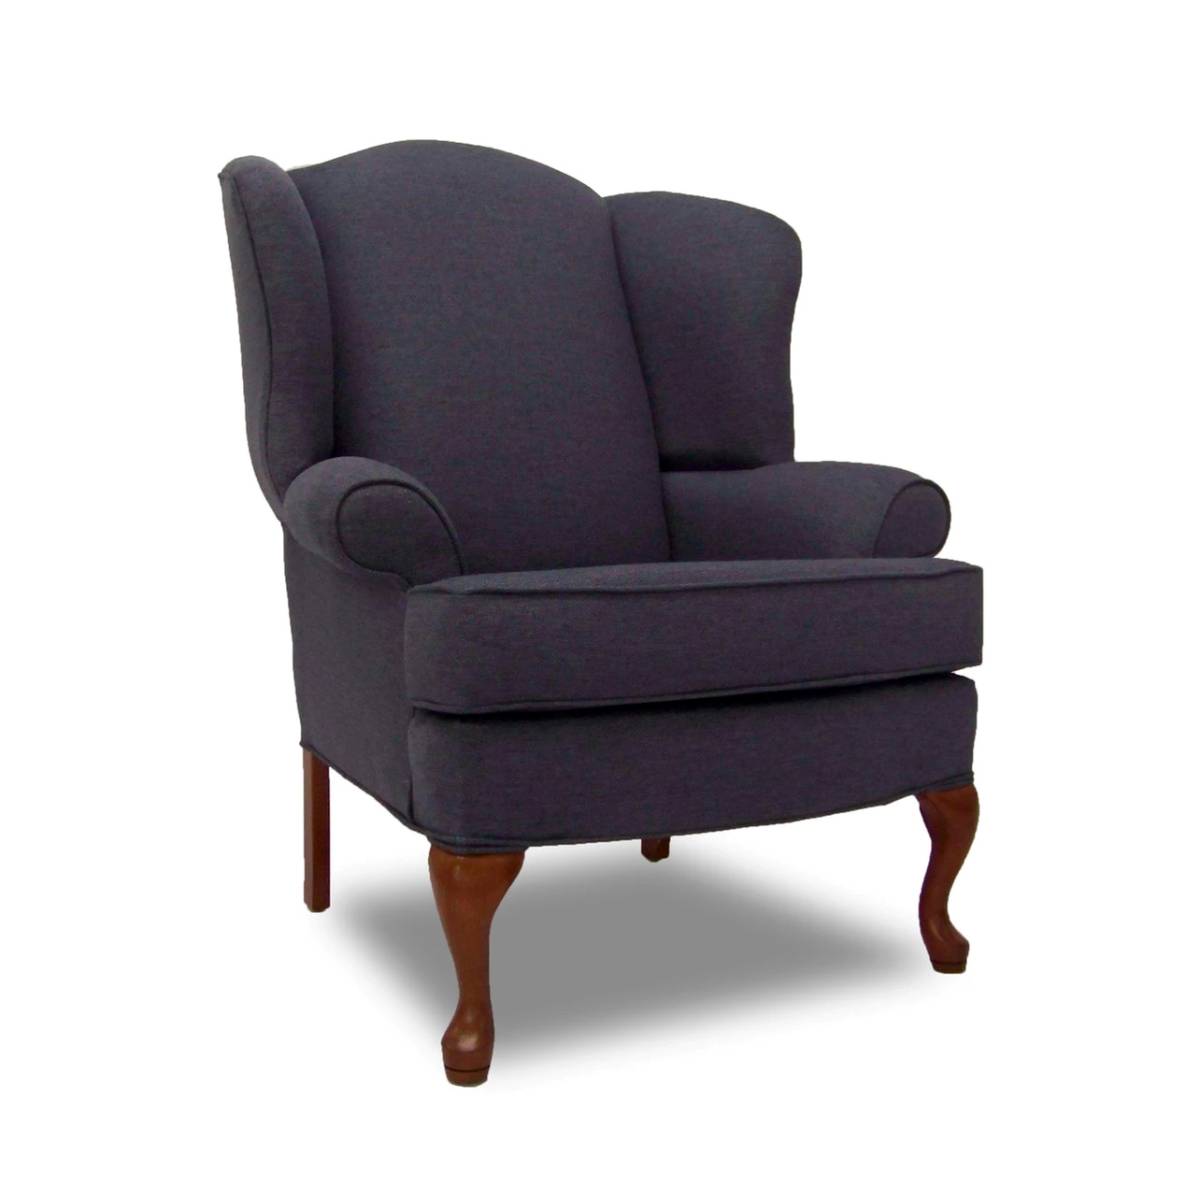 Queen Anne Wing Chair - Chippendale Furniture $695.99